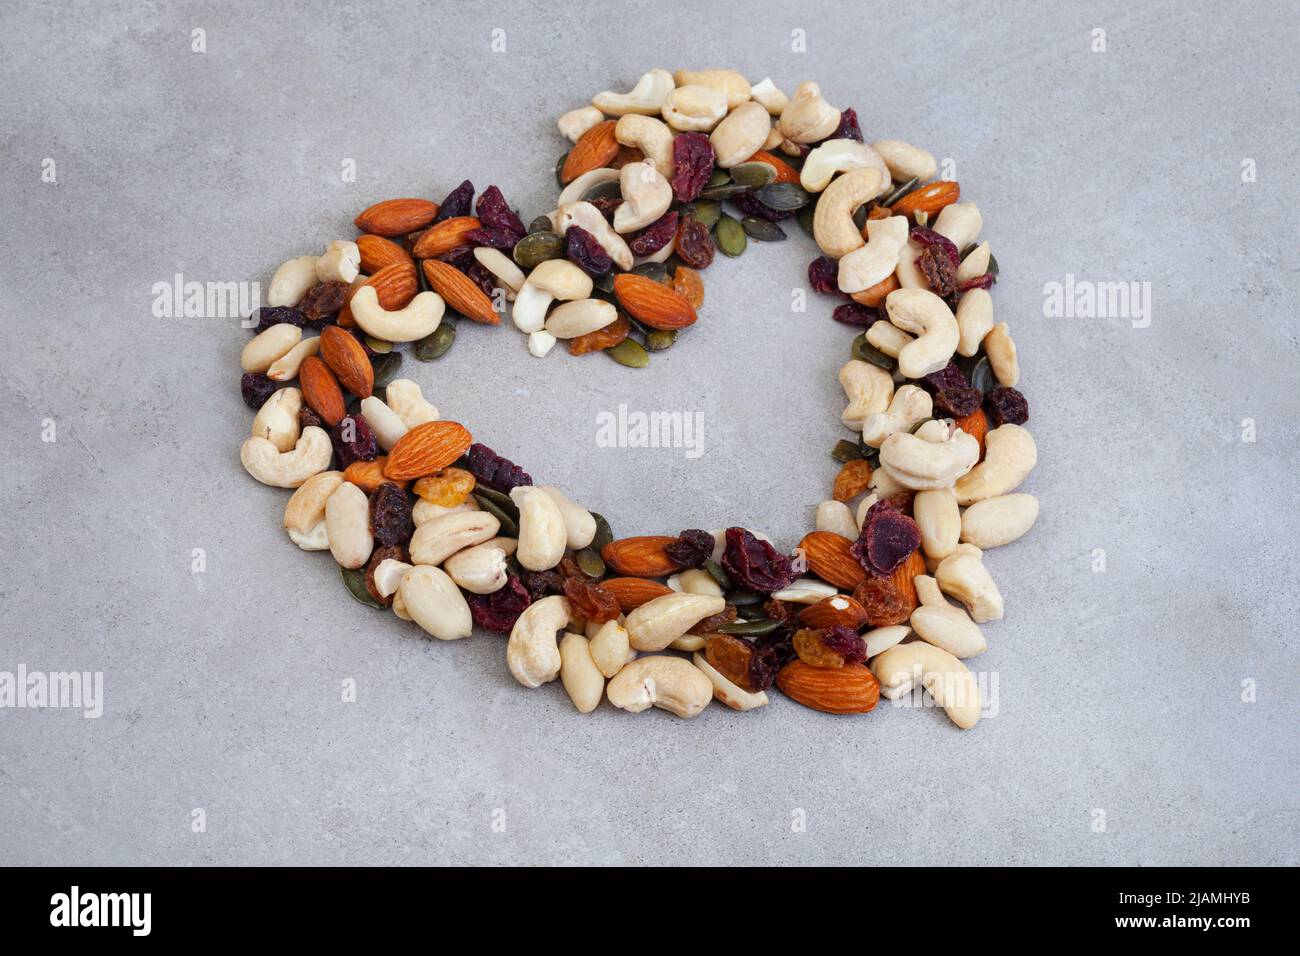 heart shape made of nut and fruit mix on mottled grey with copy space Stock Photo